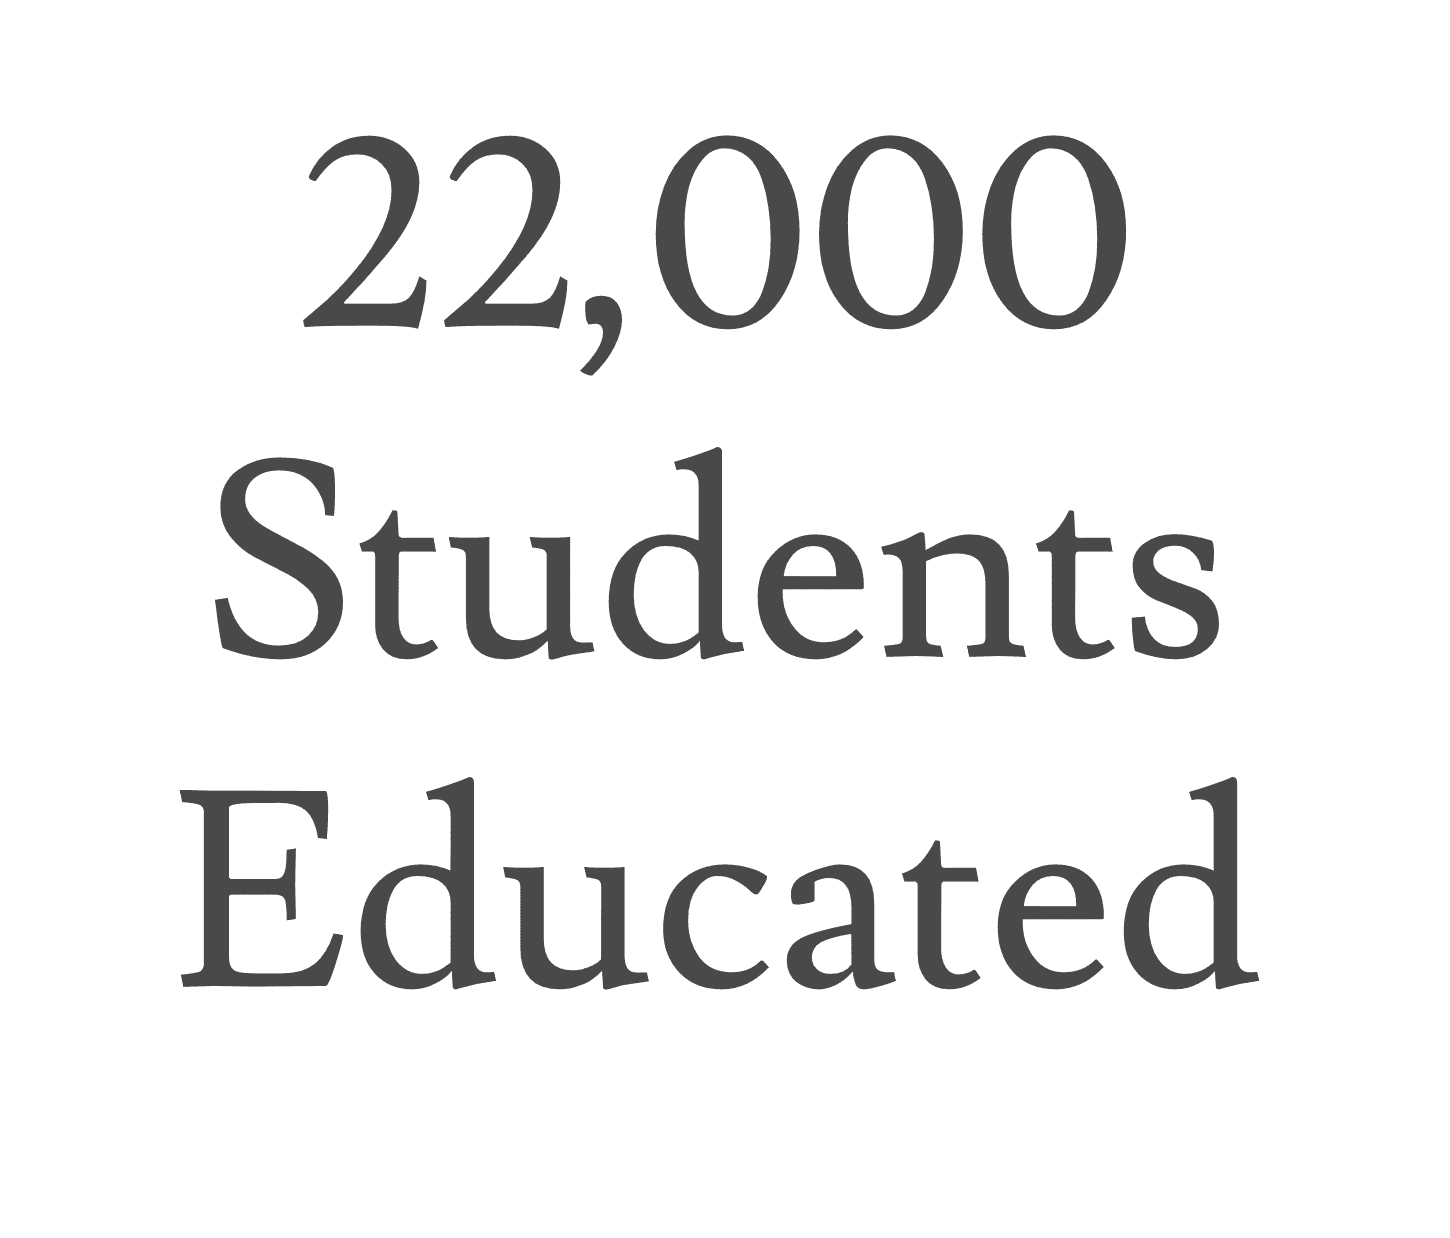 22,000 students educated